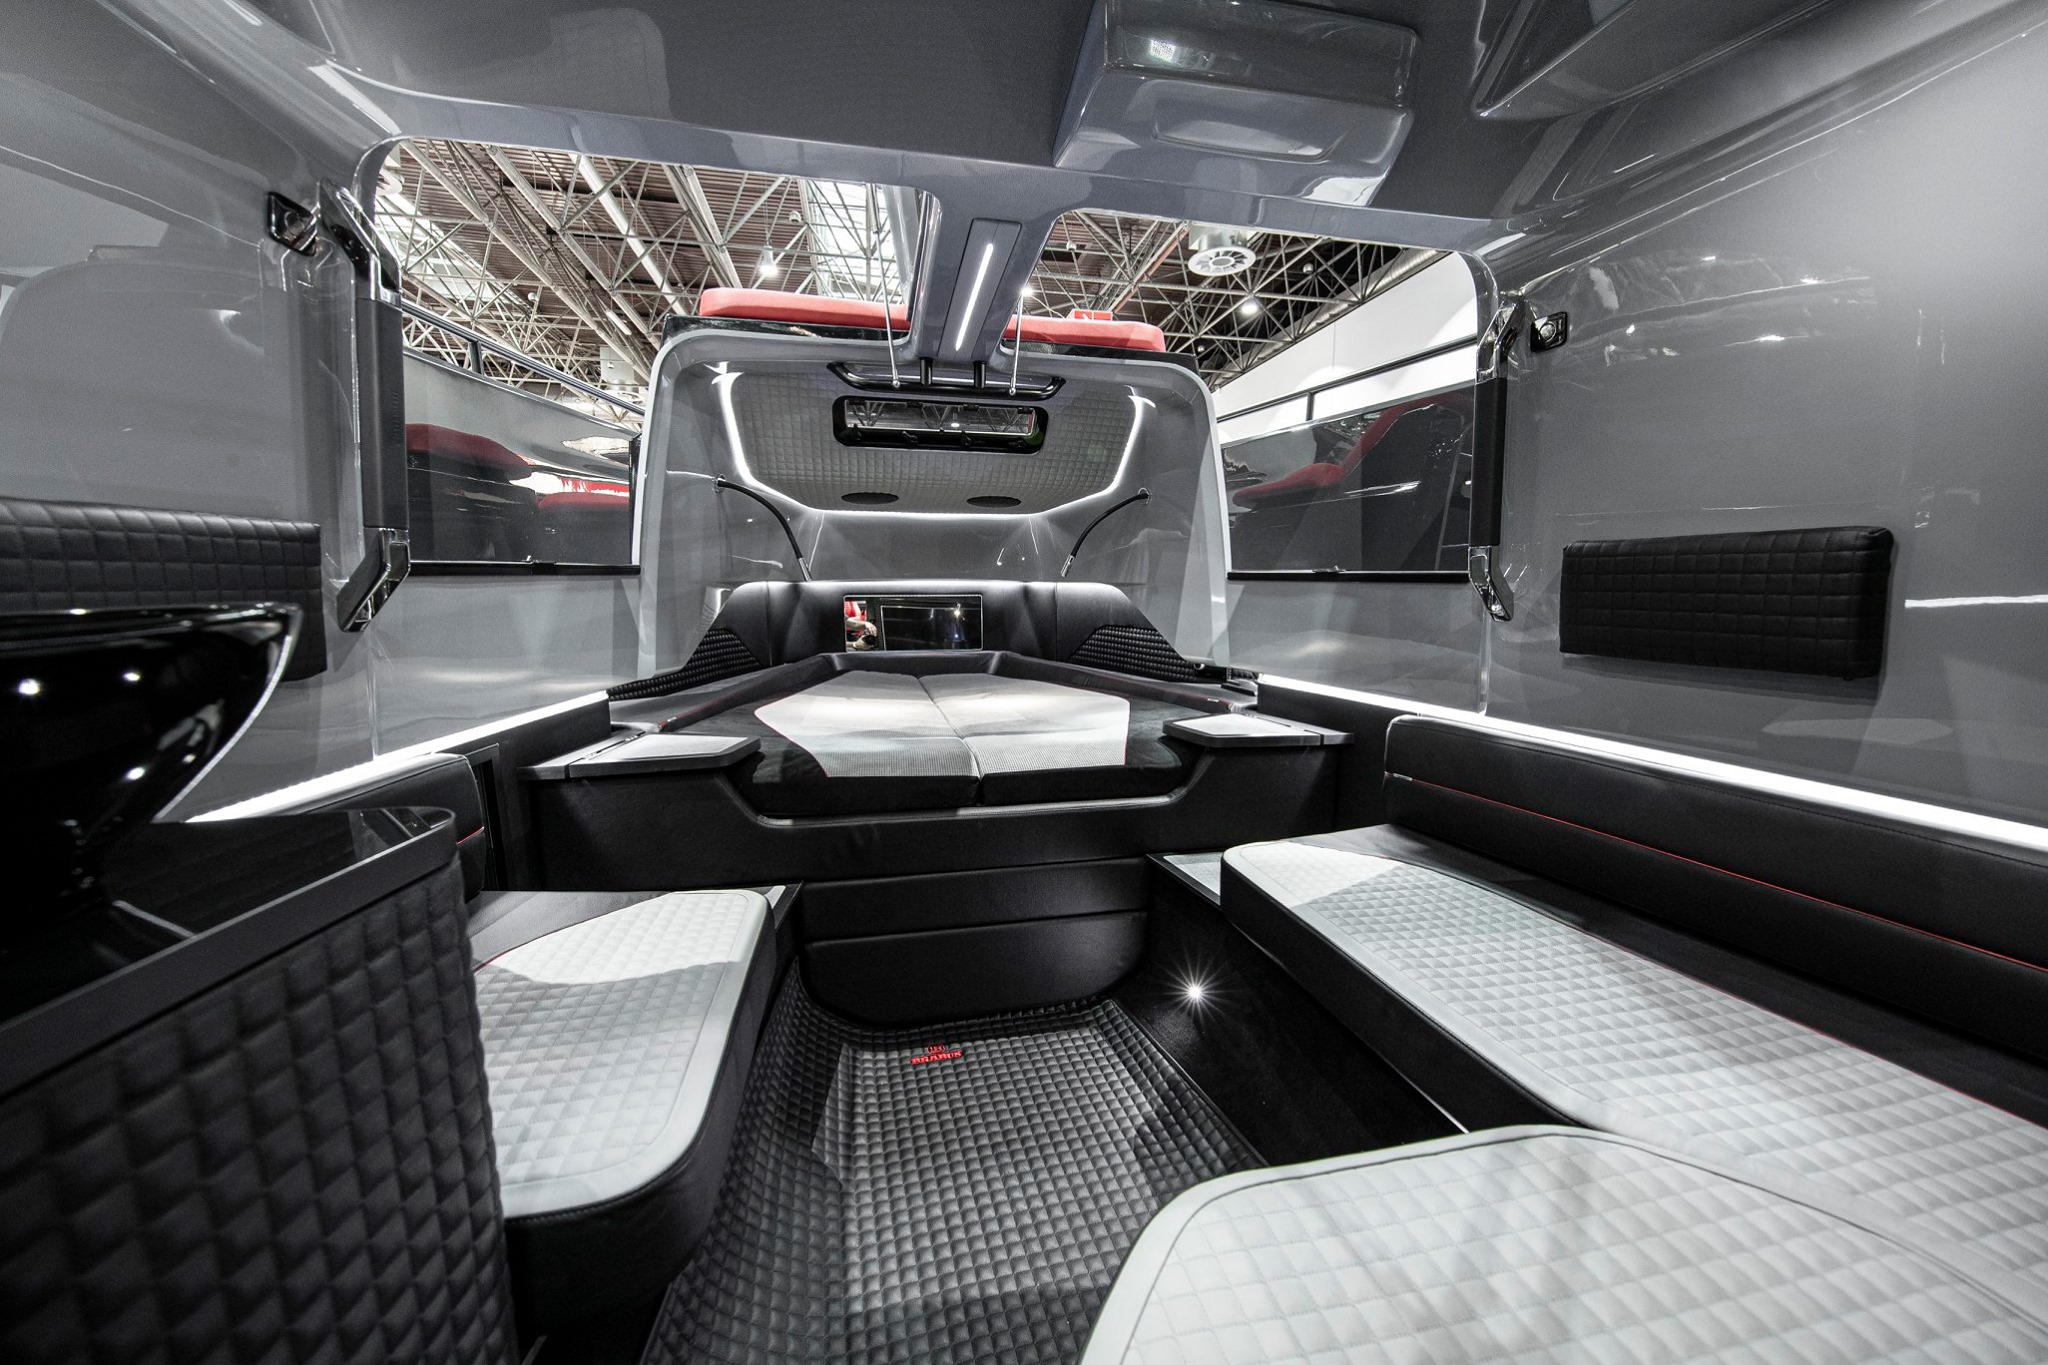 Cabin interior of the Shadow 900 